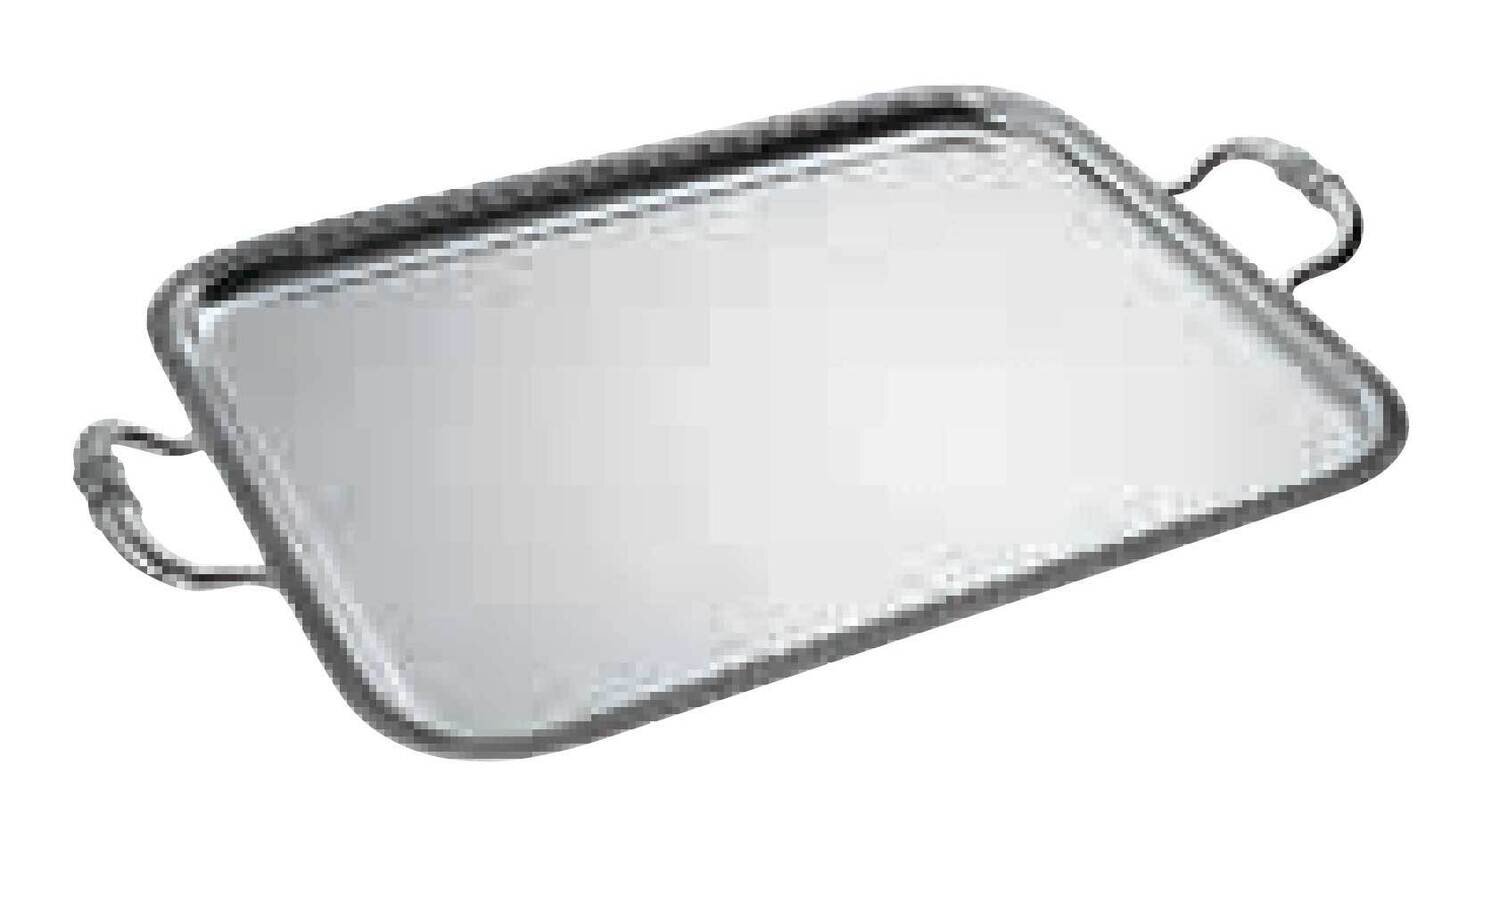 Ercuis Trianon Rectangular Serving Tray With Handles 15.75 x 10.625 Inch Silver Plated F51T450-40